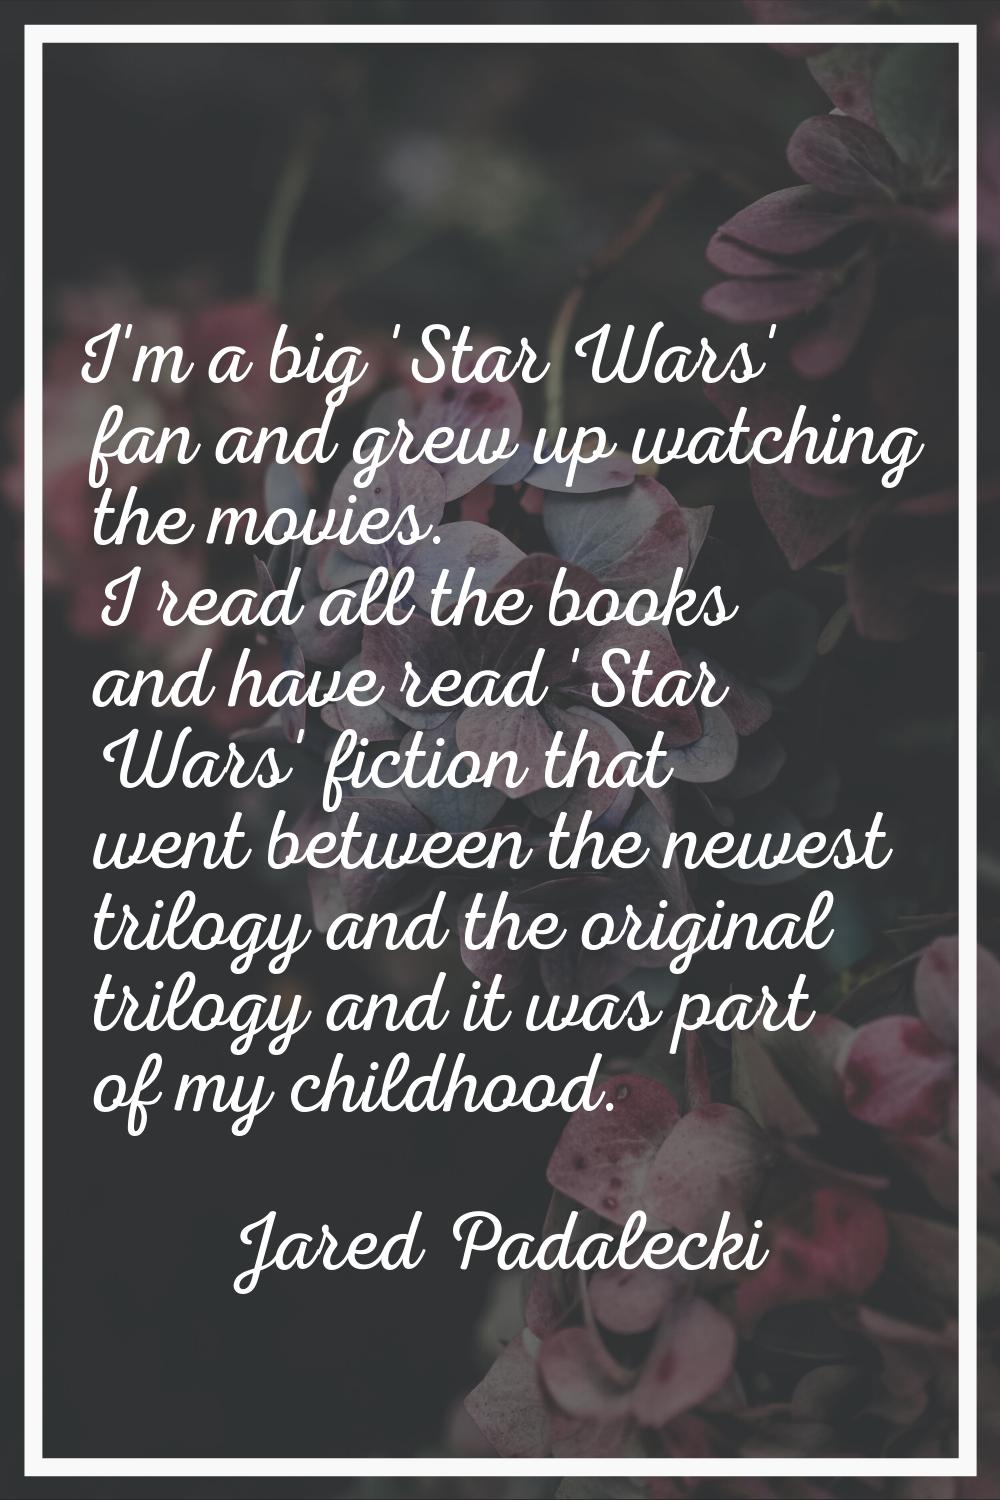 I'm a big 'Star Wars' fan and grew up watching the movies. I read all the books and have read 'Star